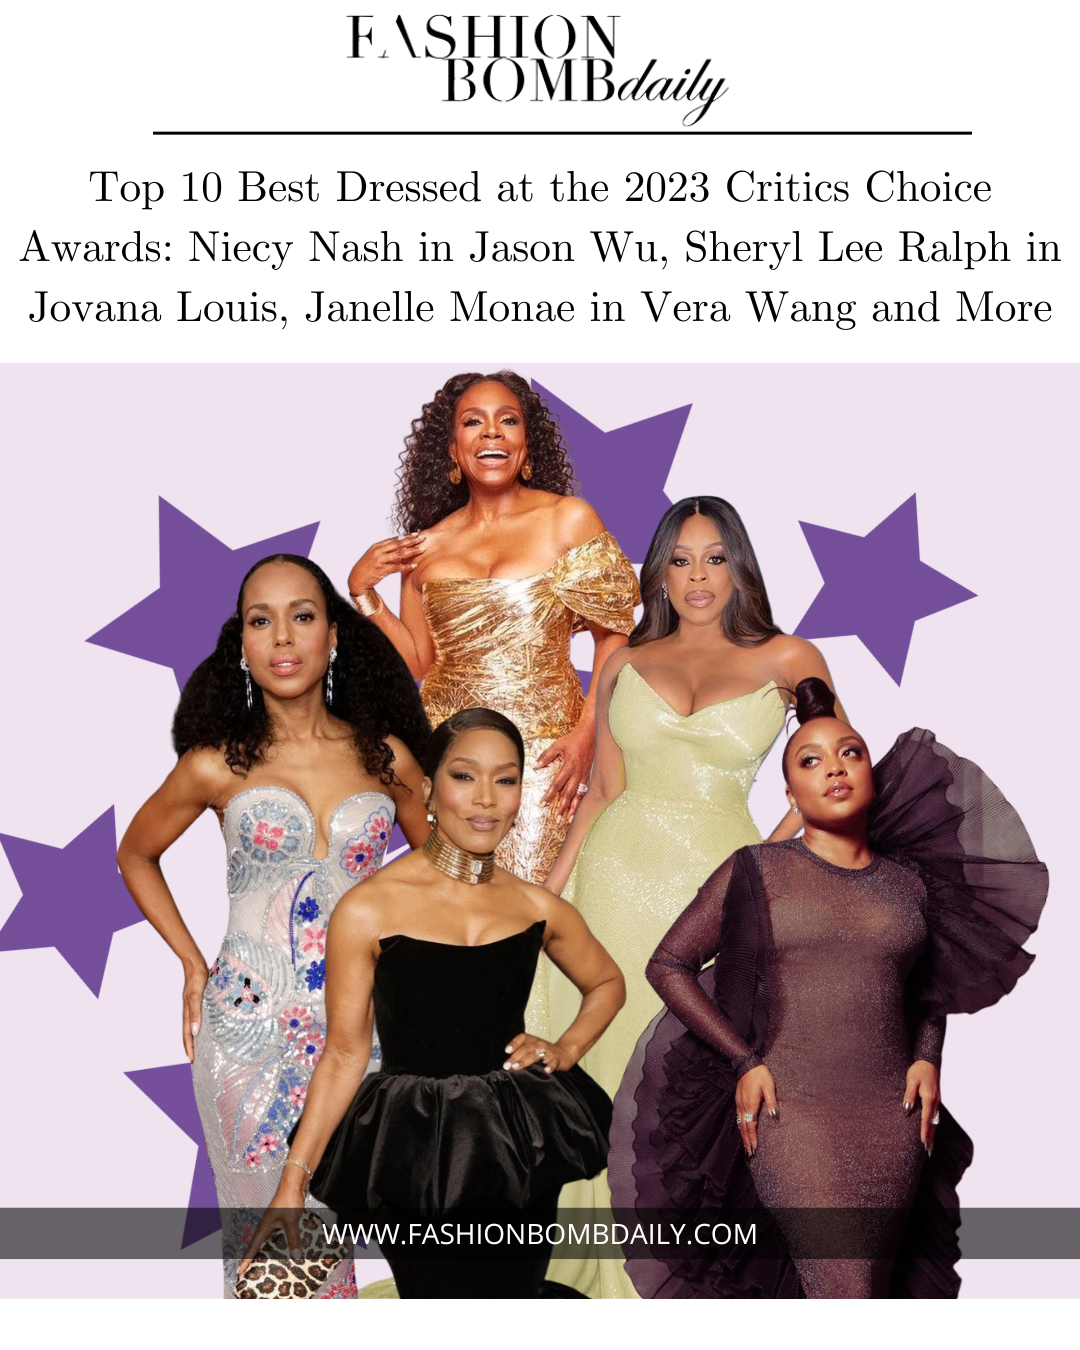 Niecy Nash in Jason Wu, Sheryl Lee Ralph in Jovana Louis, Janelle Monae in Vera Wang and Extra